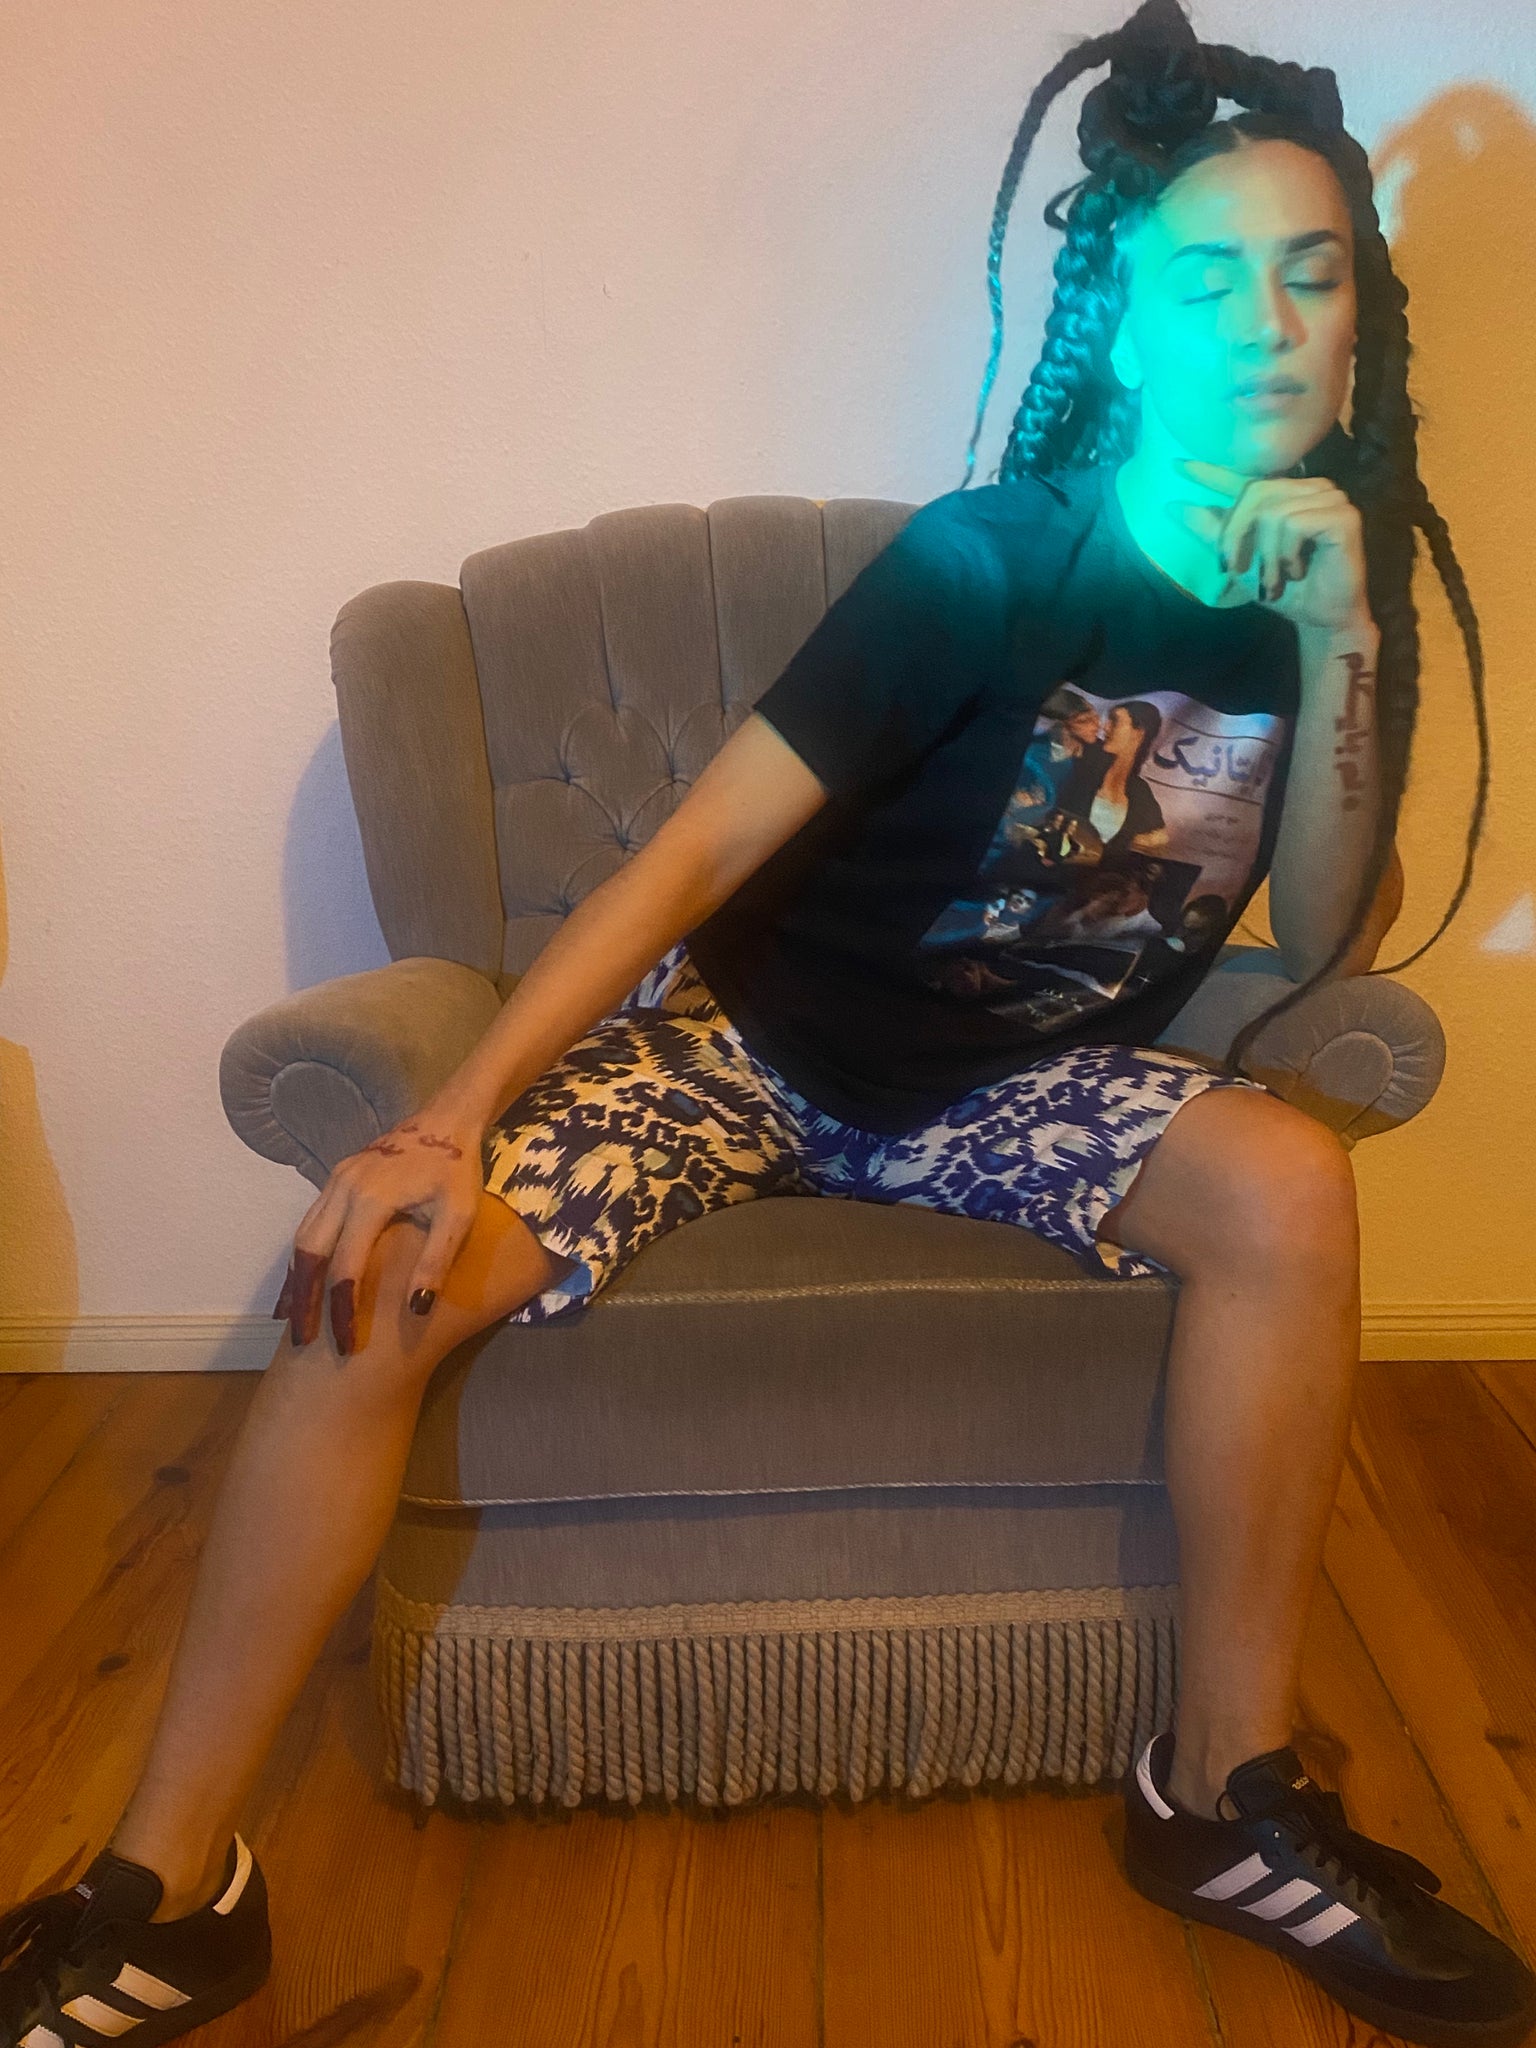 A blue green light shines on a woman whose eyes are closed on a grey chair, wearing Adidas Sambas, a Titanic graphic tee, and adras/ikat capris